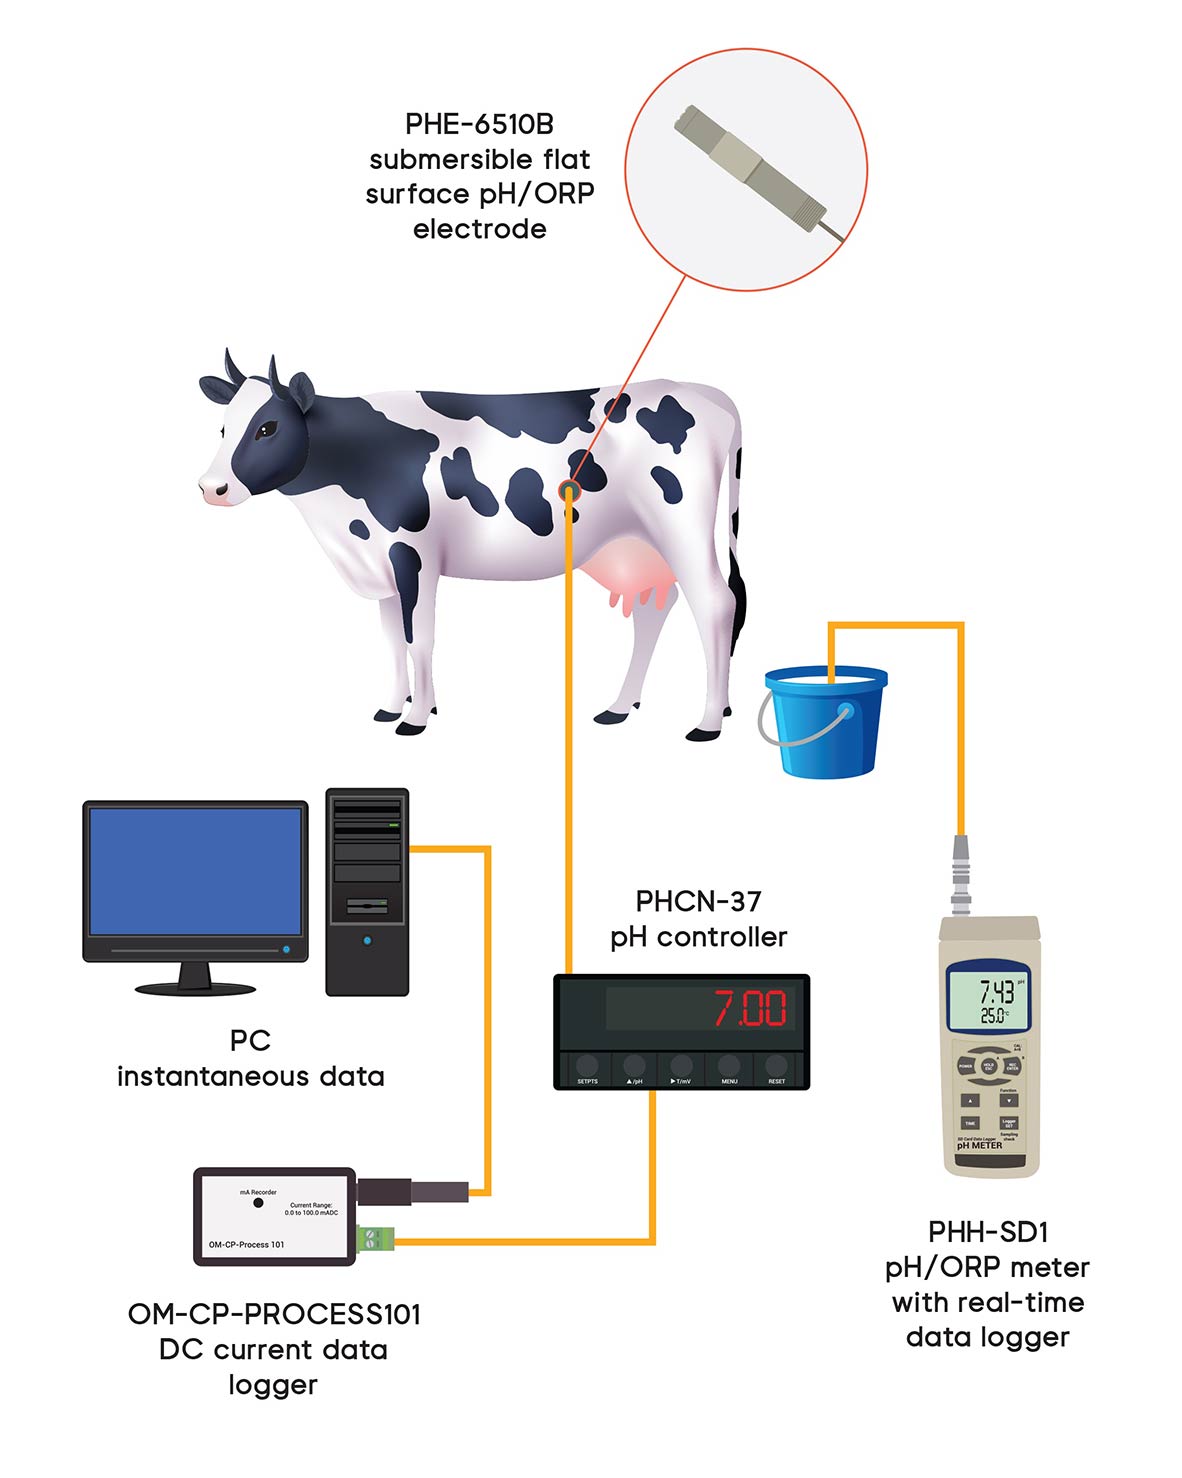 How to Measure pH Levels in a Ruminant's Digestive System